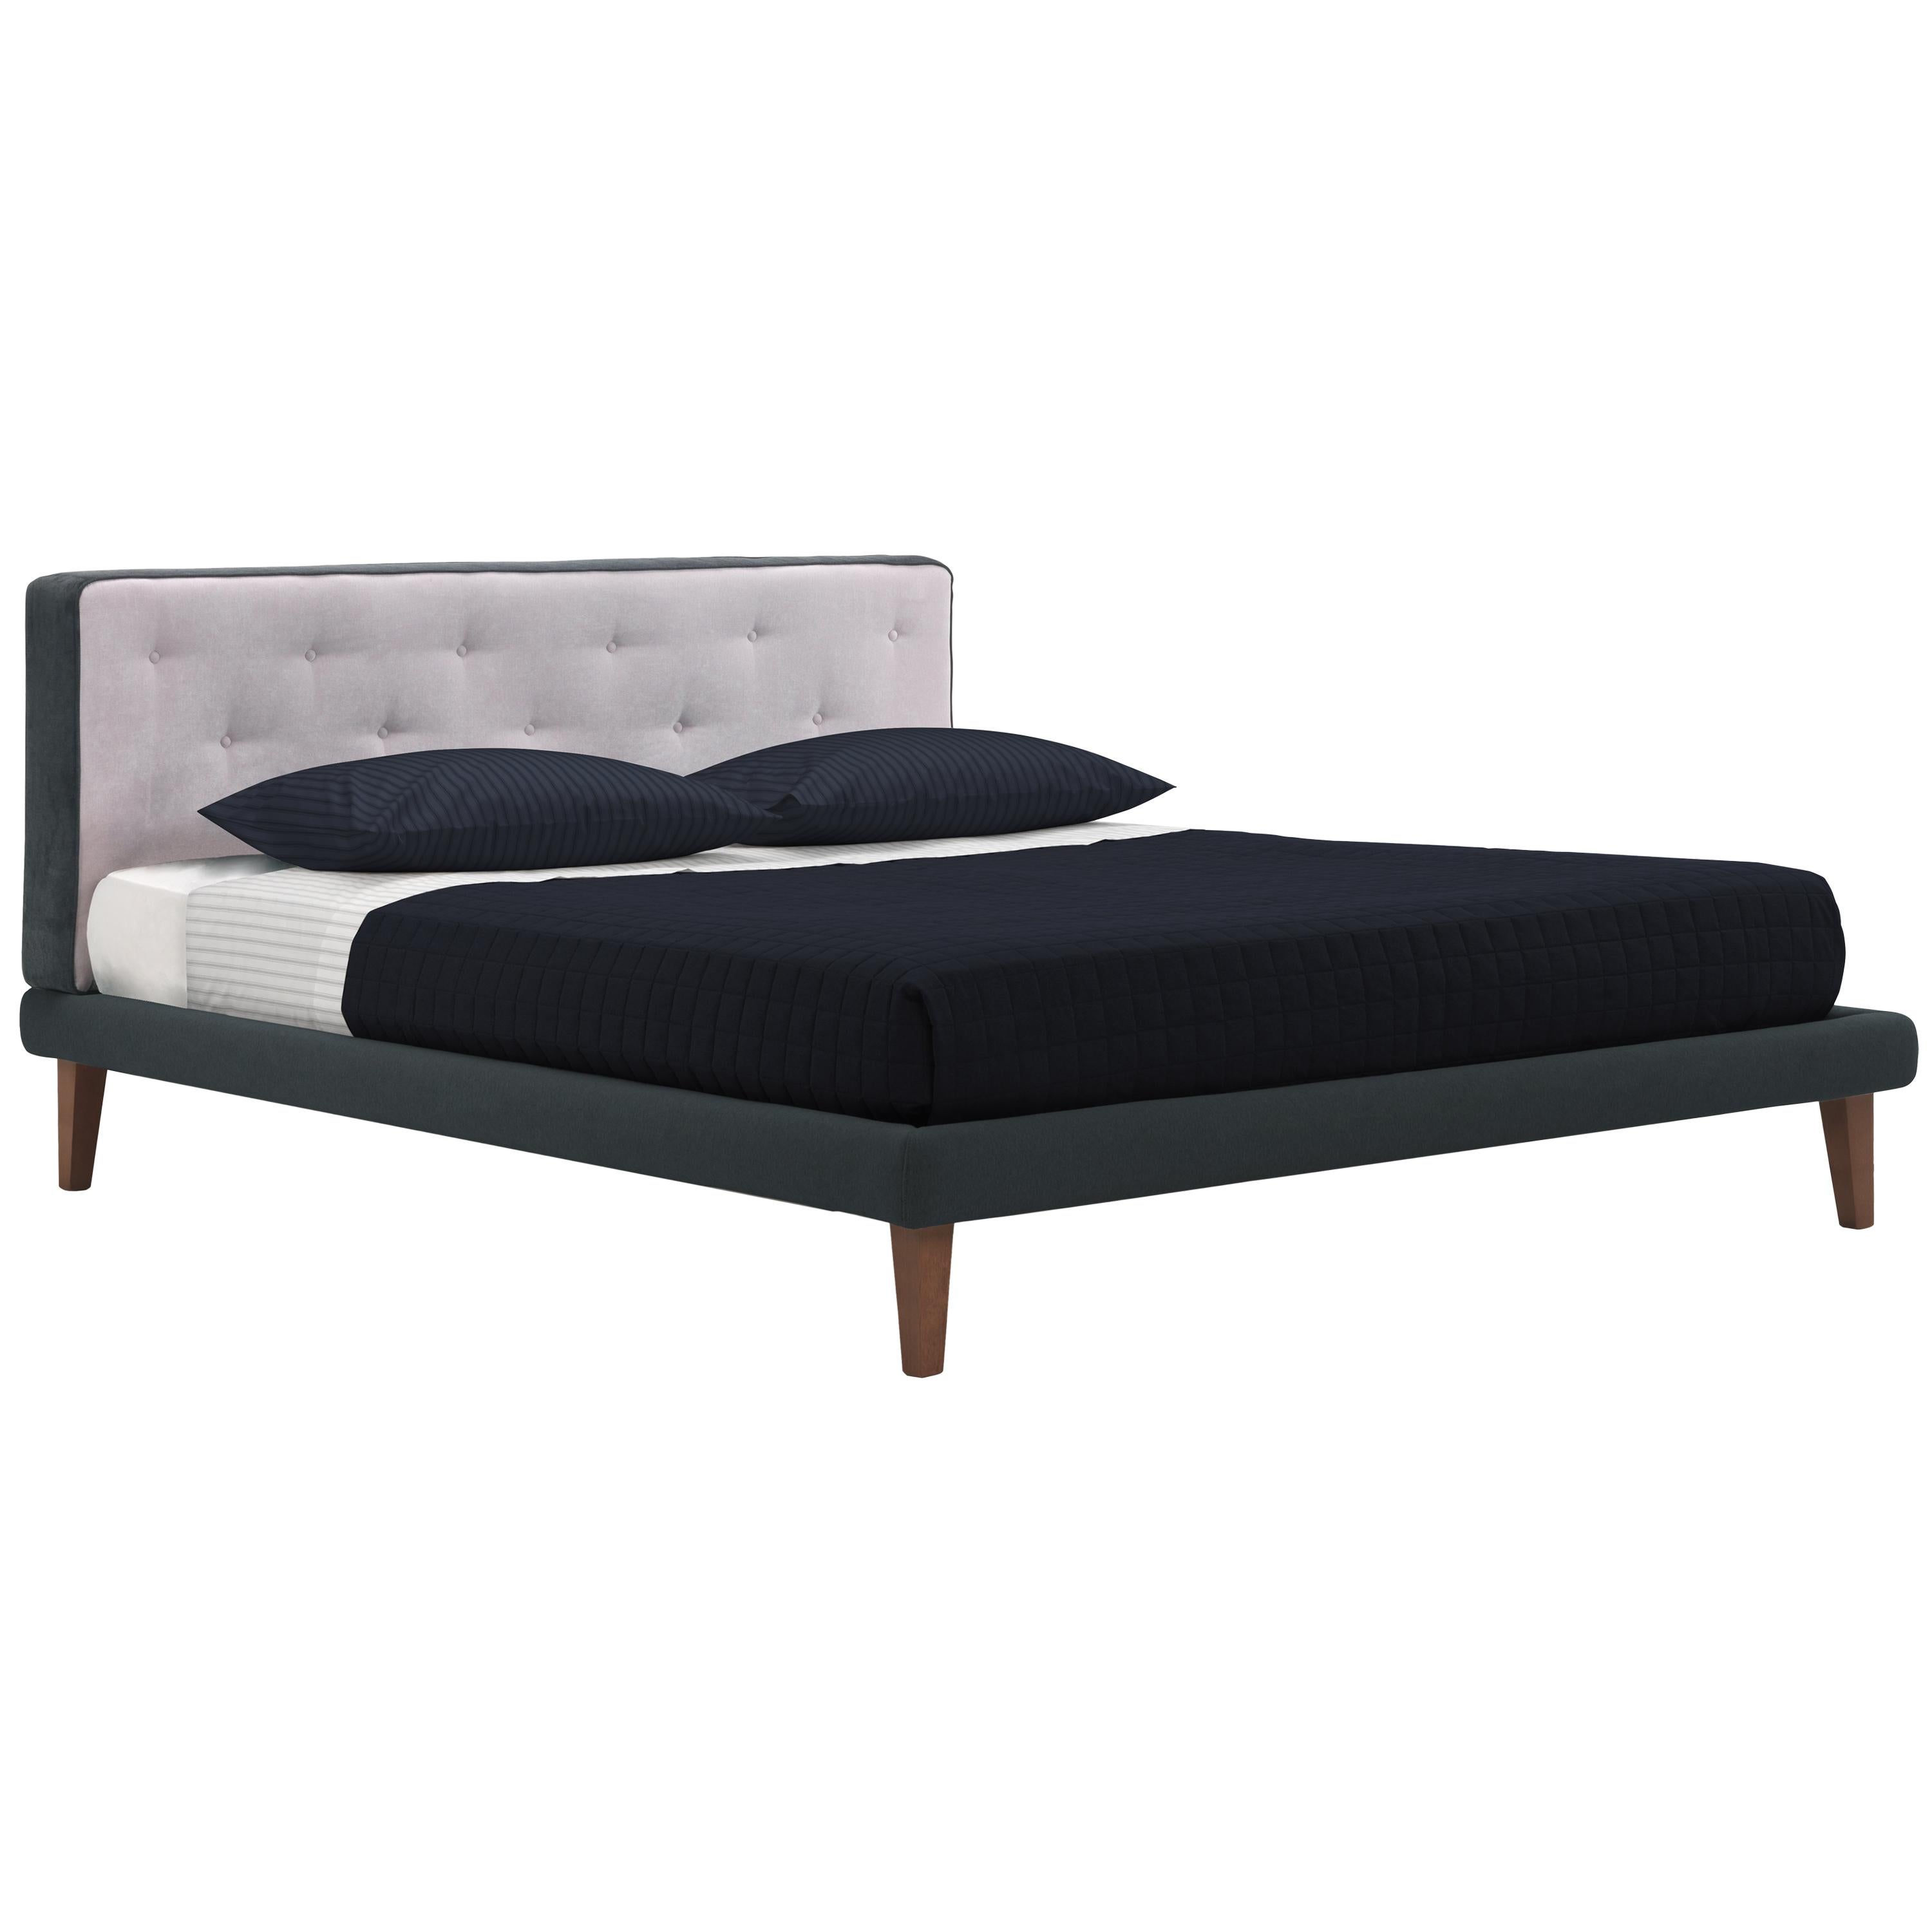 'SEMPIONE' King Size Bed with Bi-Color Buttoned Headboard and Upholstered Frame For Sale